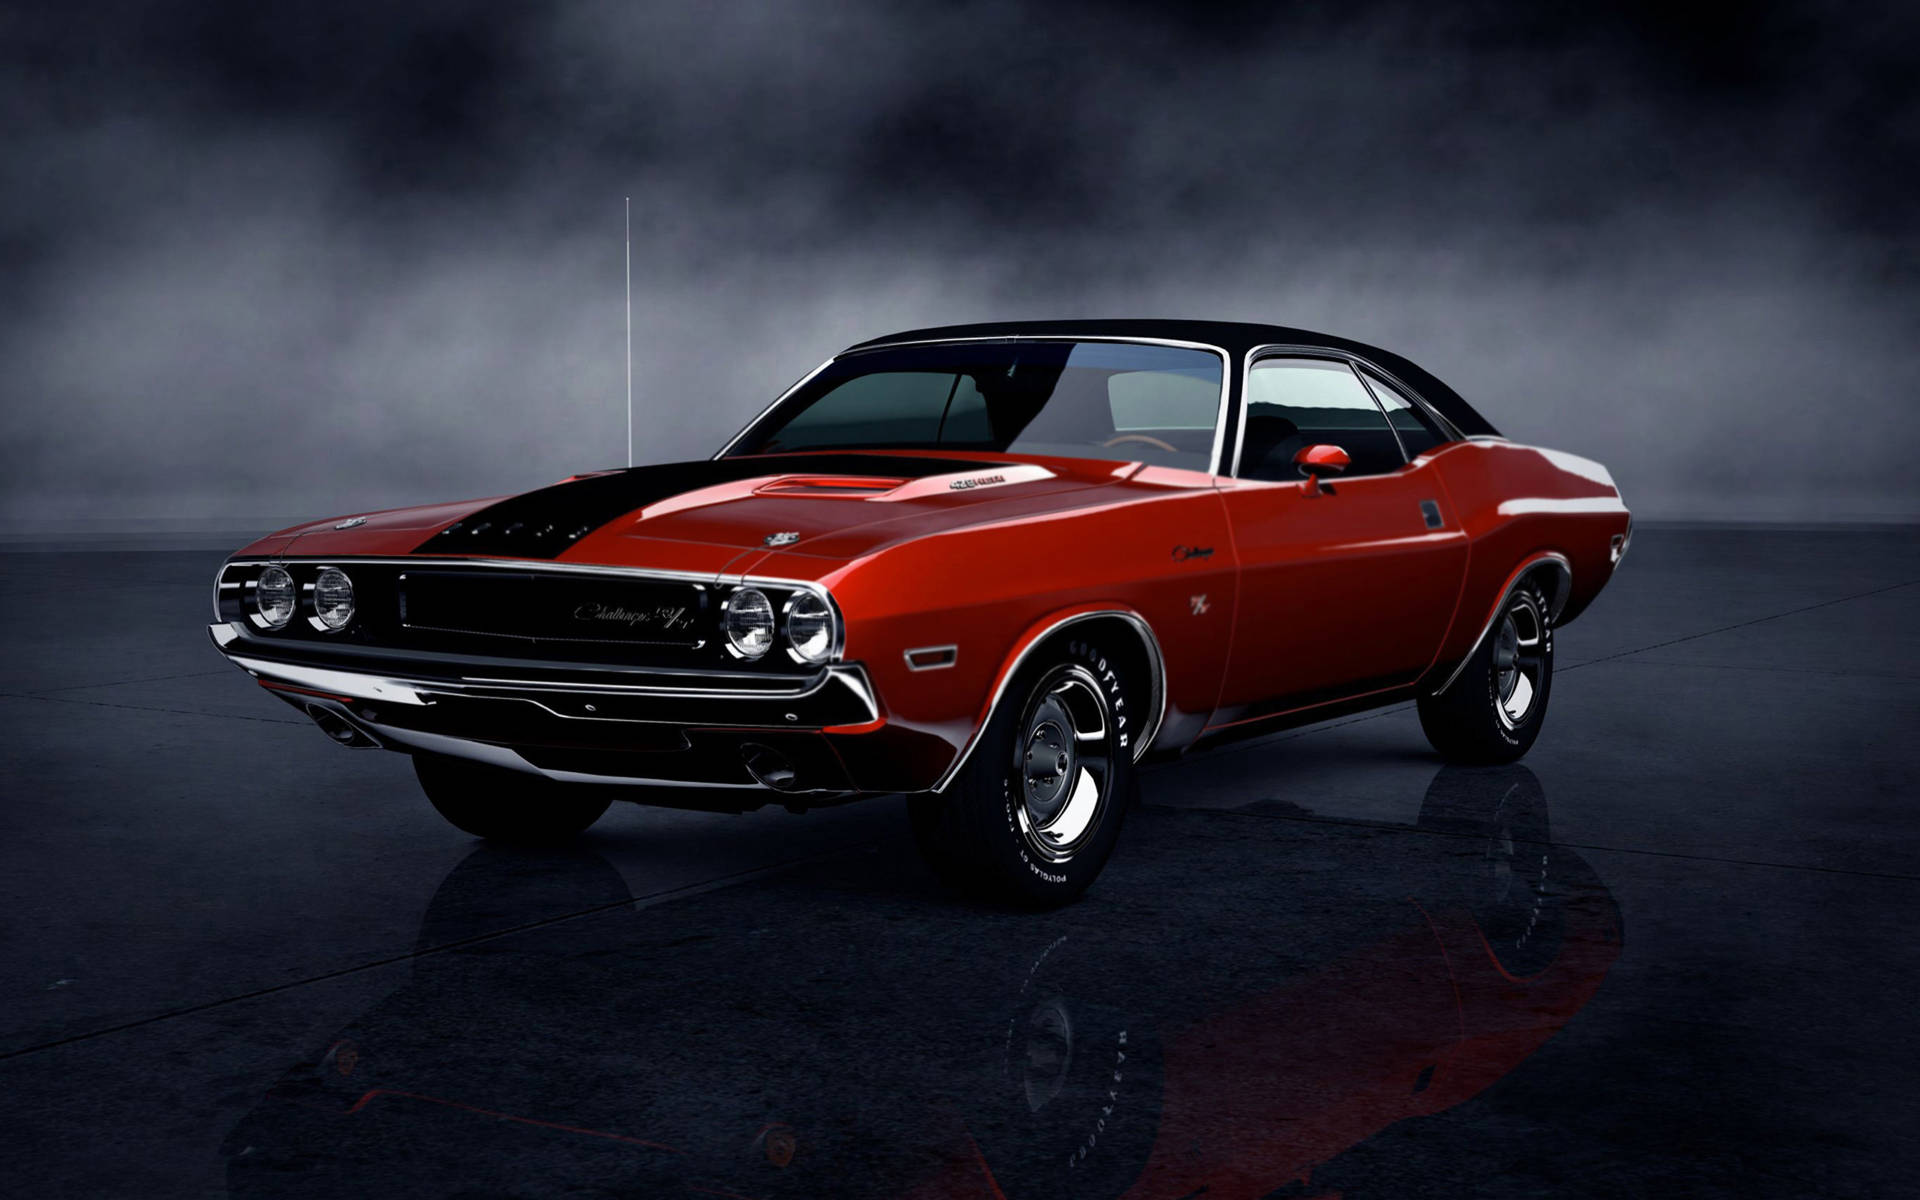 Caption: Majestic Red 1969 Dodge Charger Wallpaper